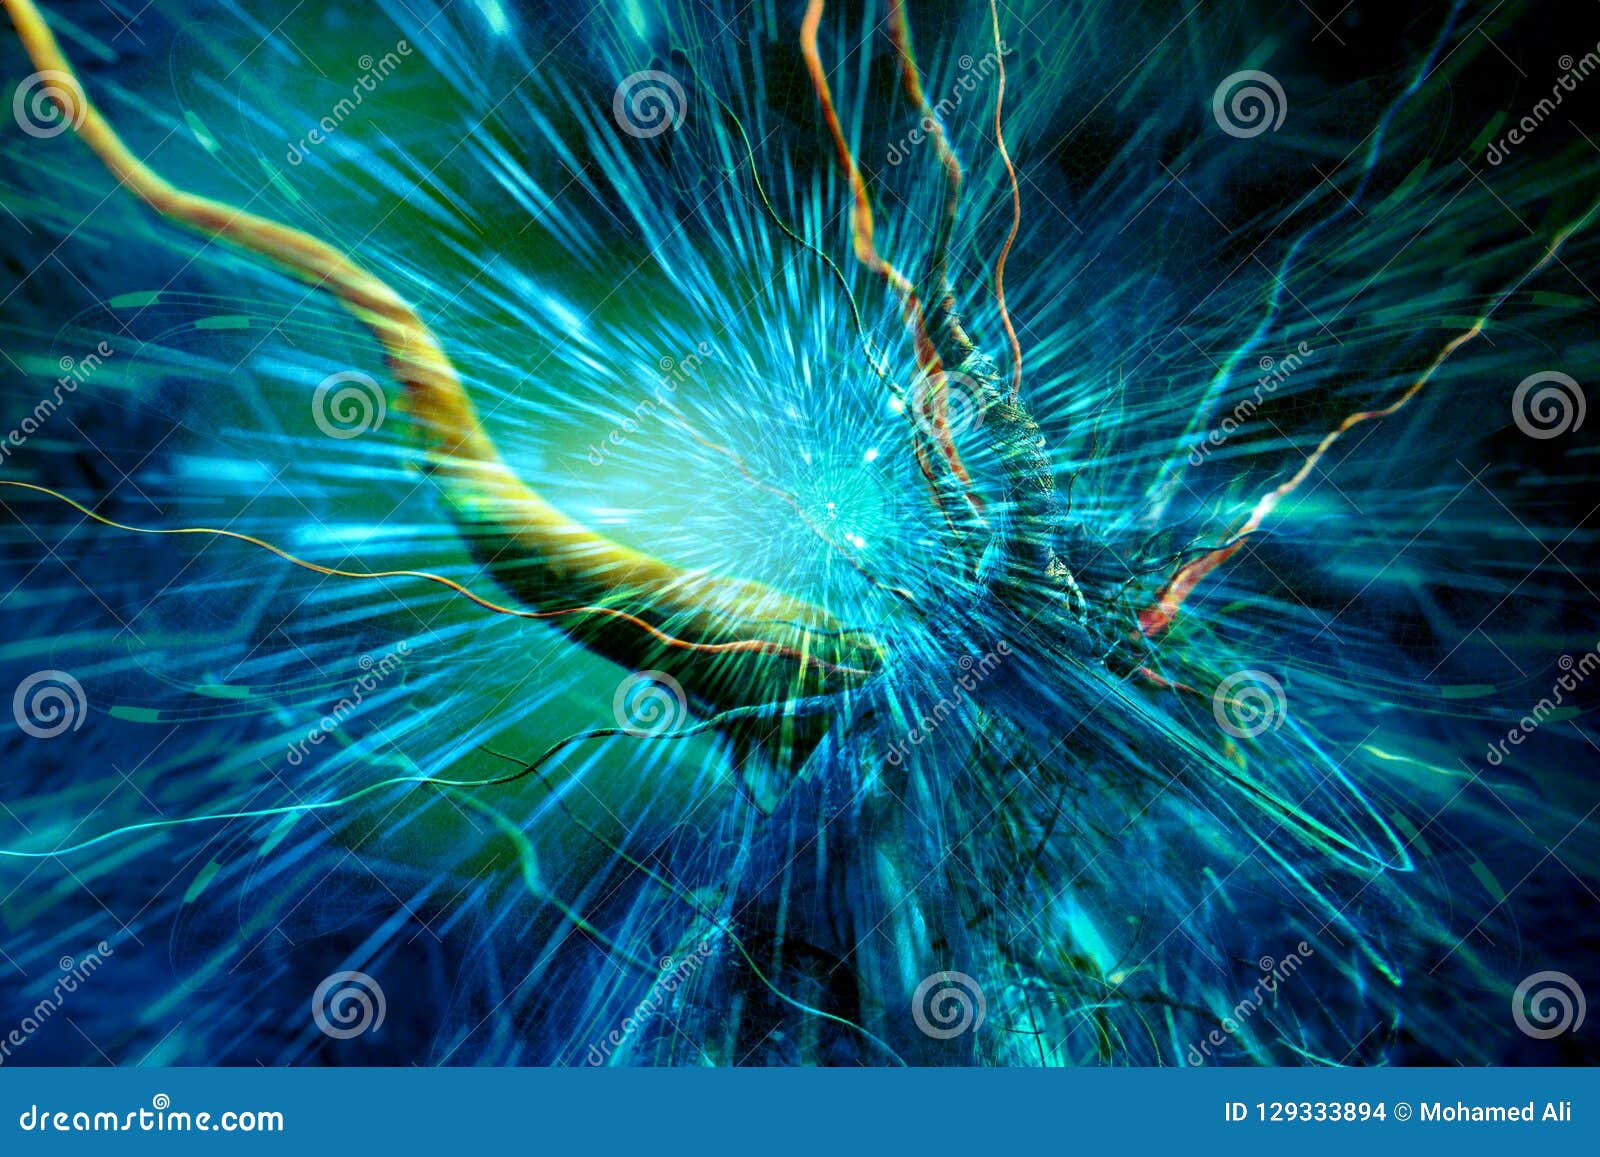 Abstract Artistic Colorful Energized Field of Energy Pursing Out of